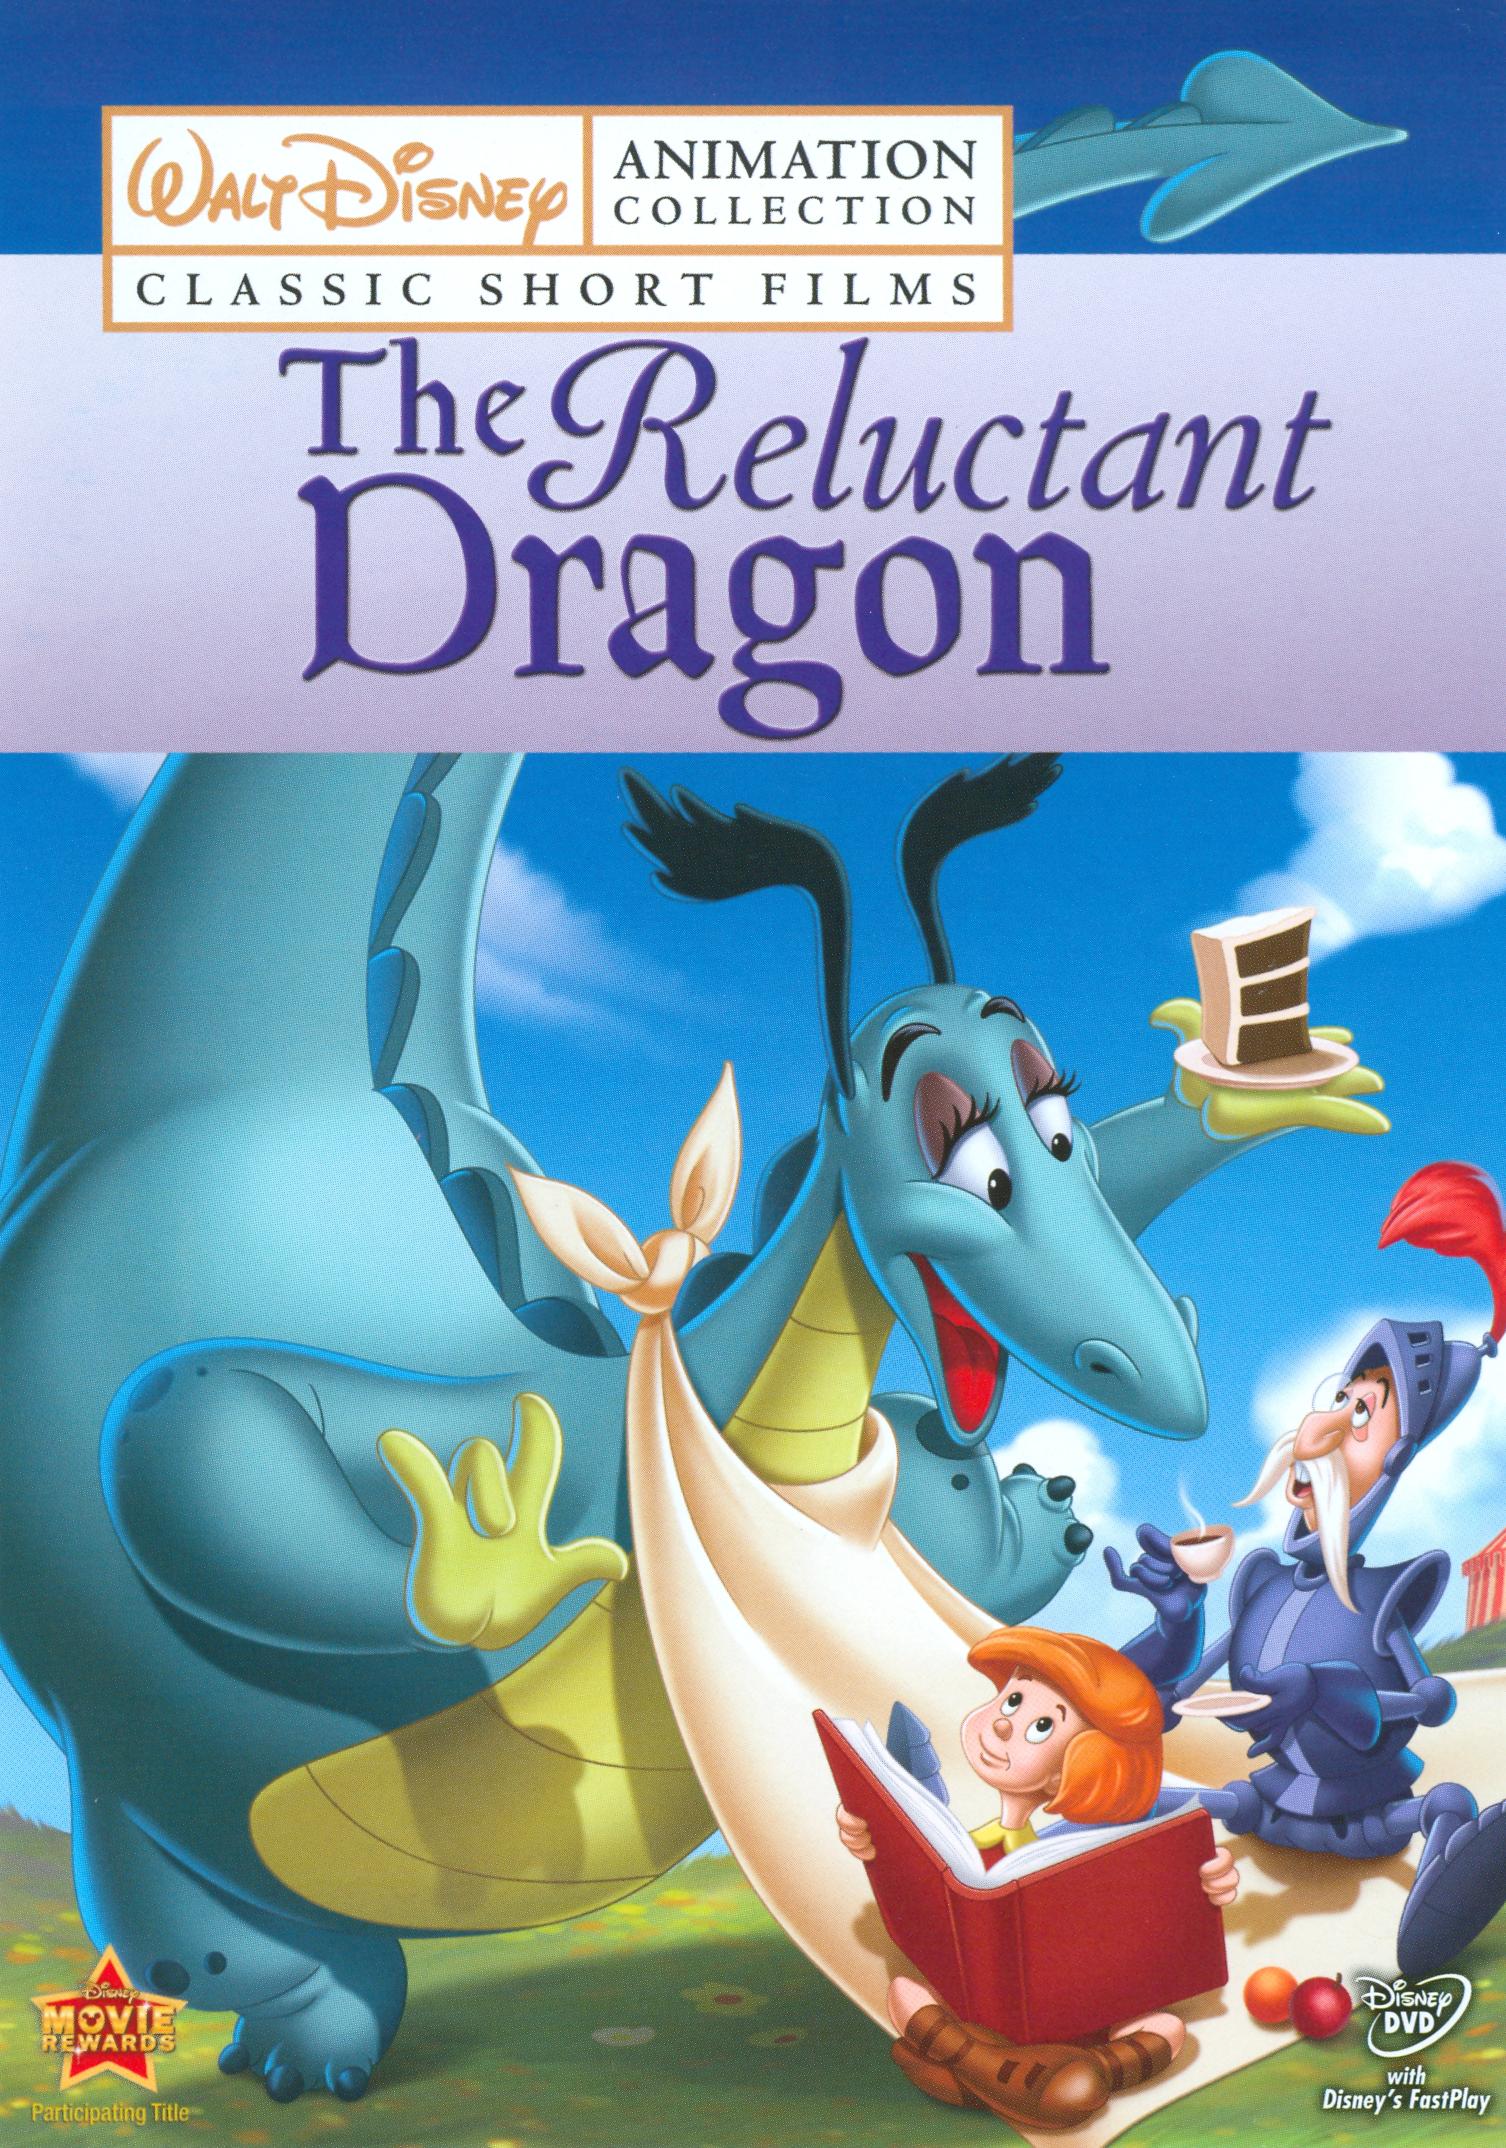 Walt Disney Animation Collection: Classic Short Films, Vol. 6 The Reluctant  Dragon - Best Buy